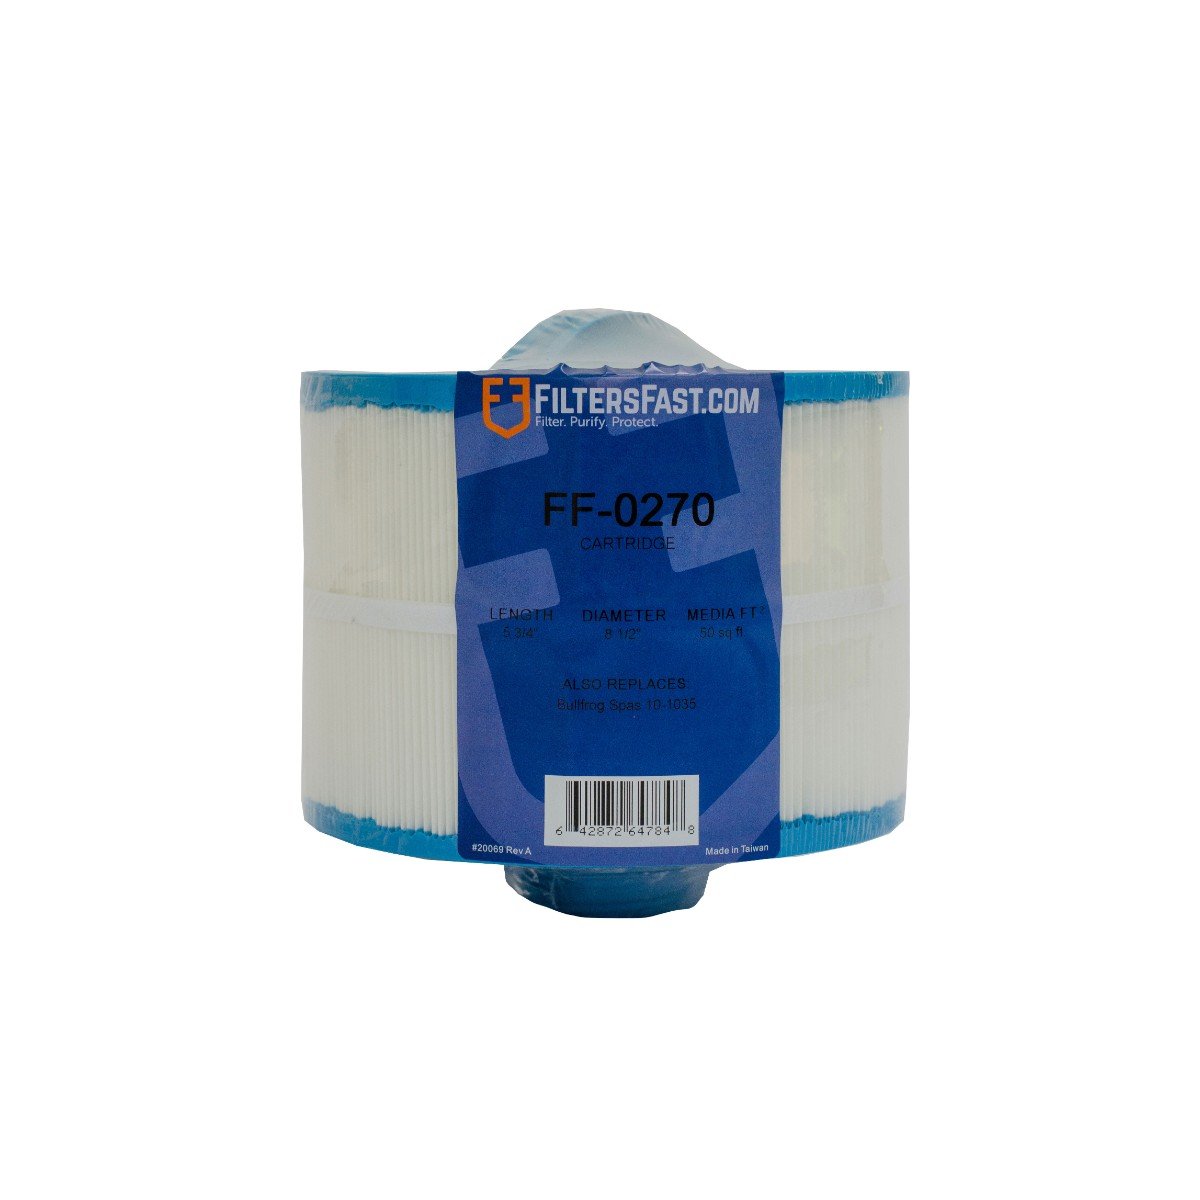 Filters Fast&reg; FF-0270 Replacement For Aladdin 15052